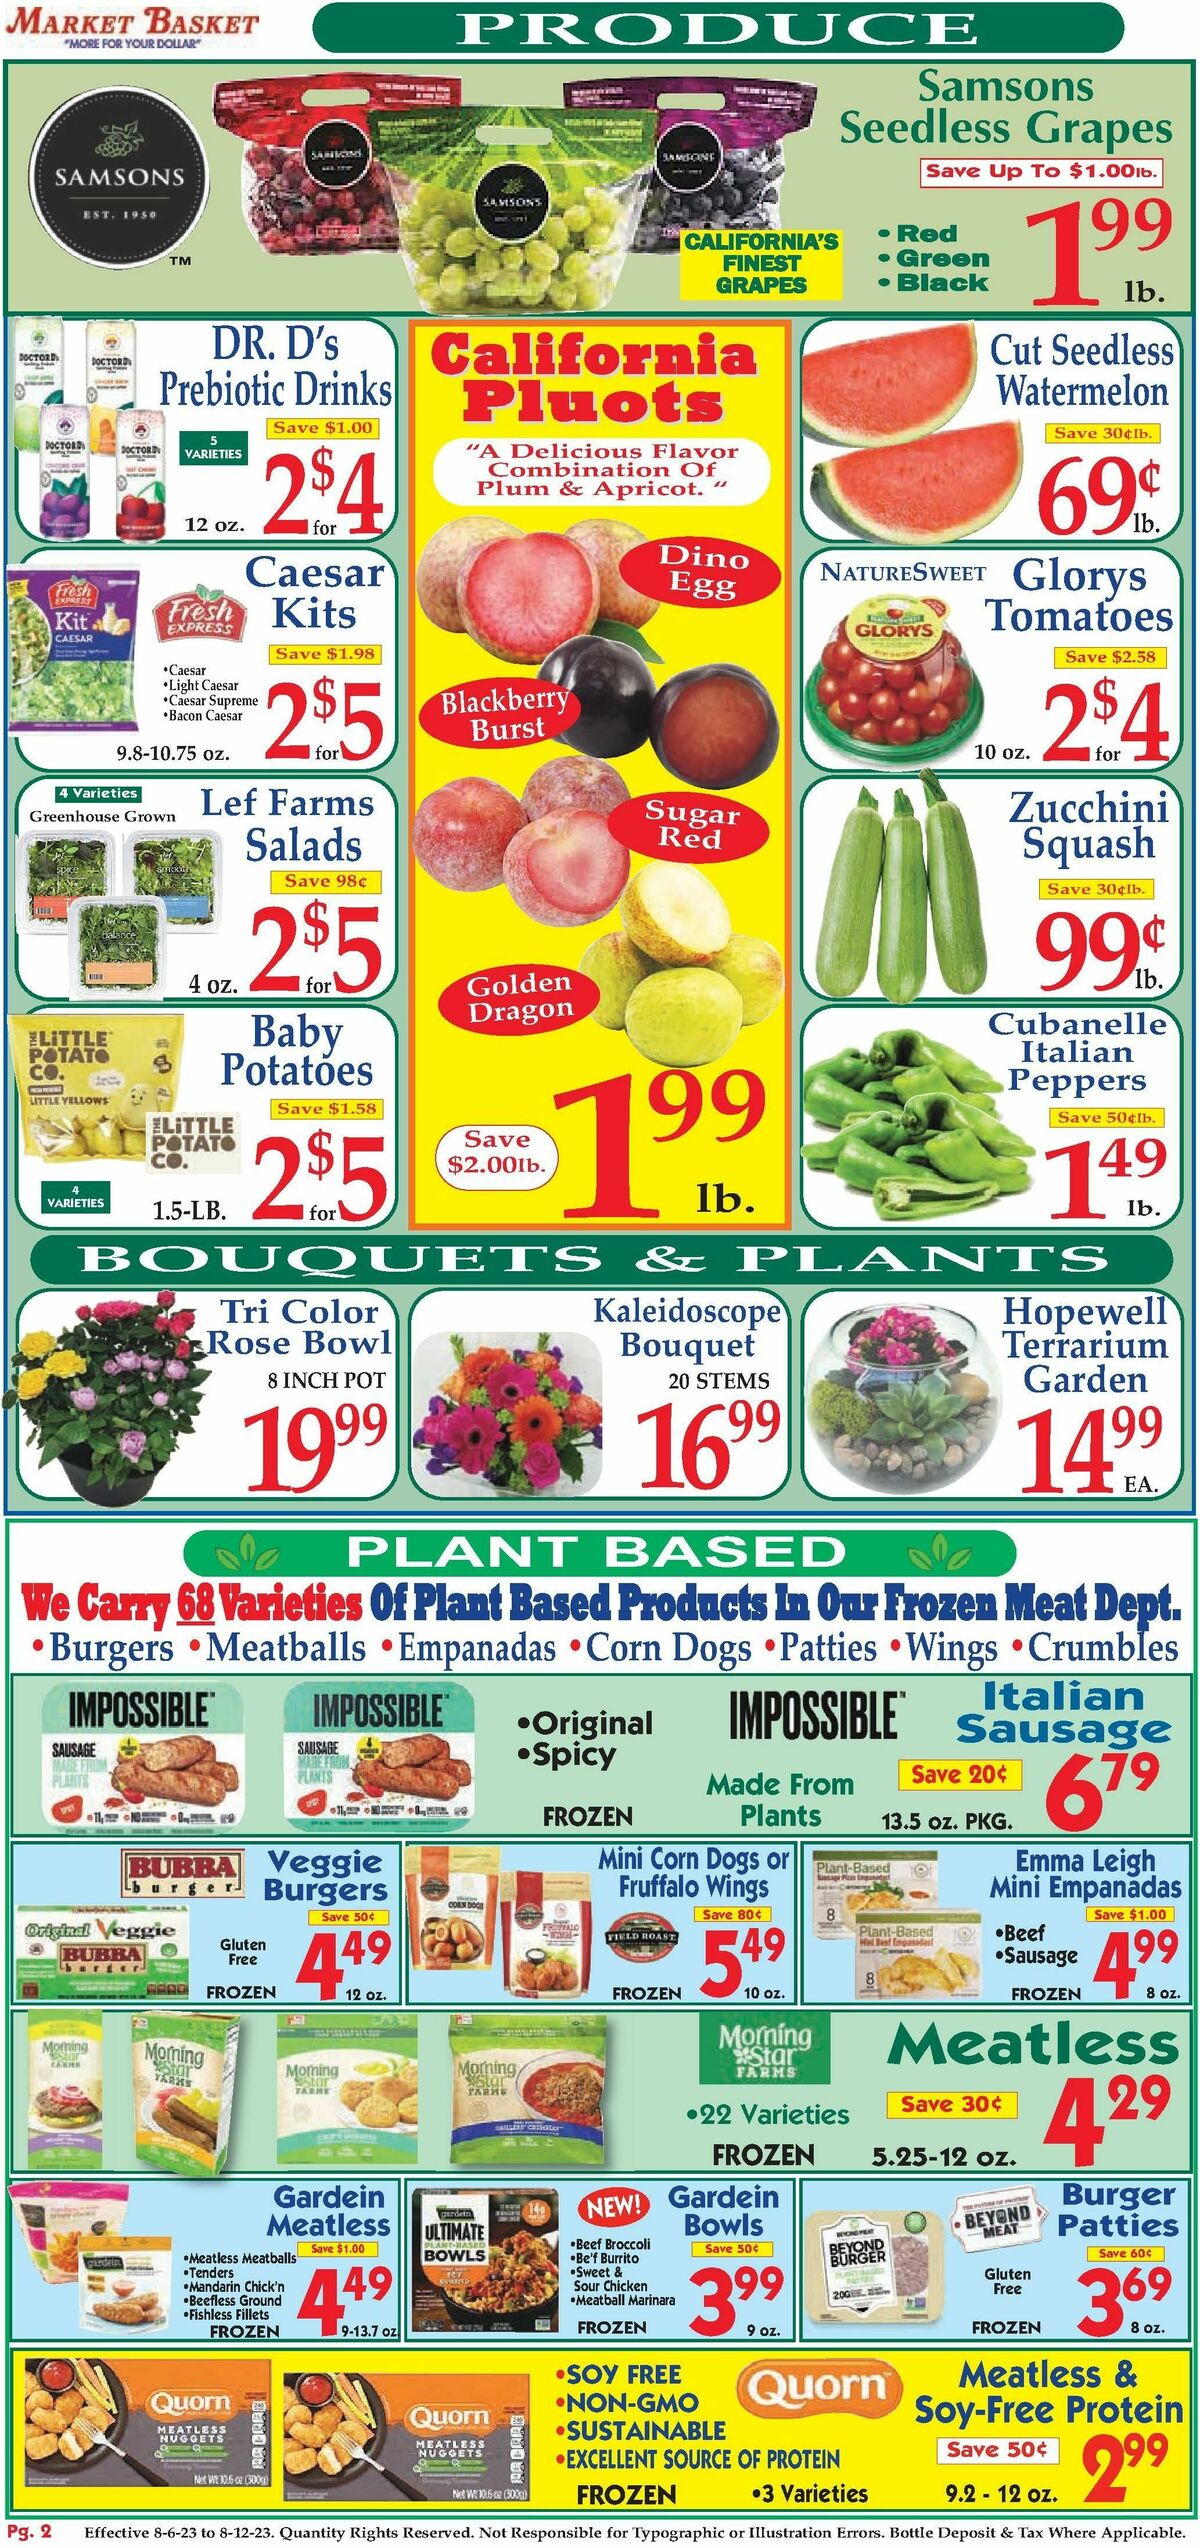 Market Basket Weekly Ad from August 6